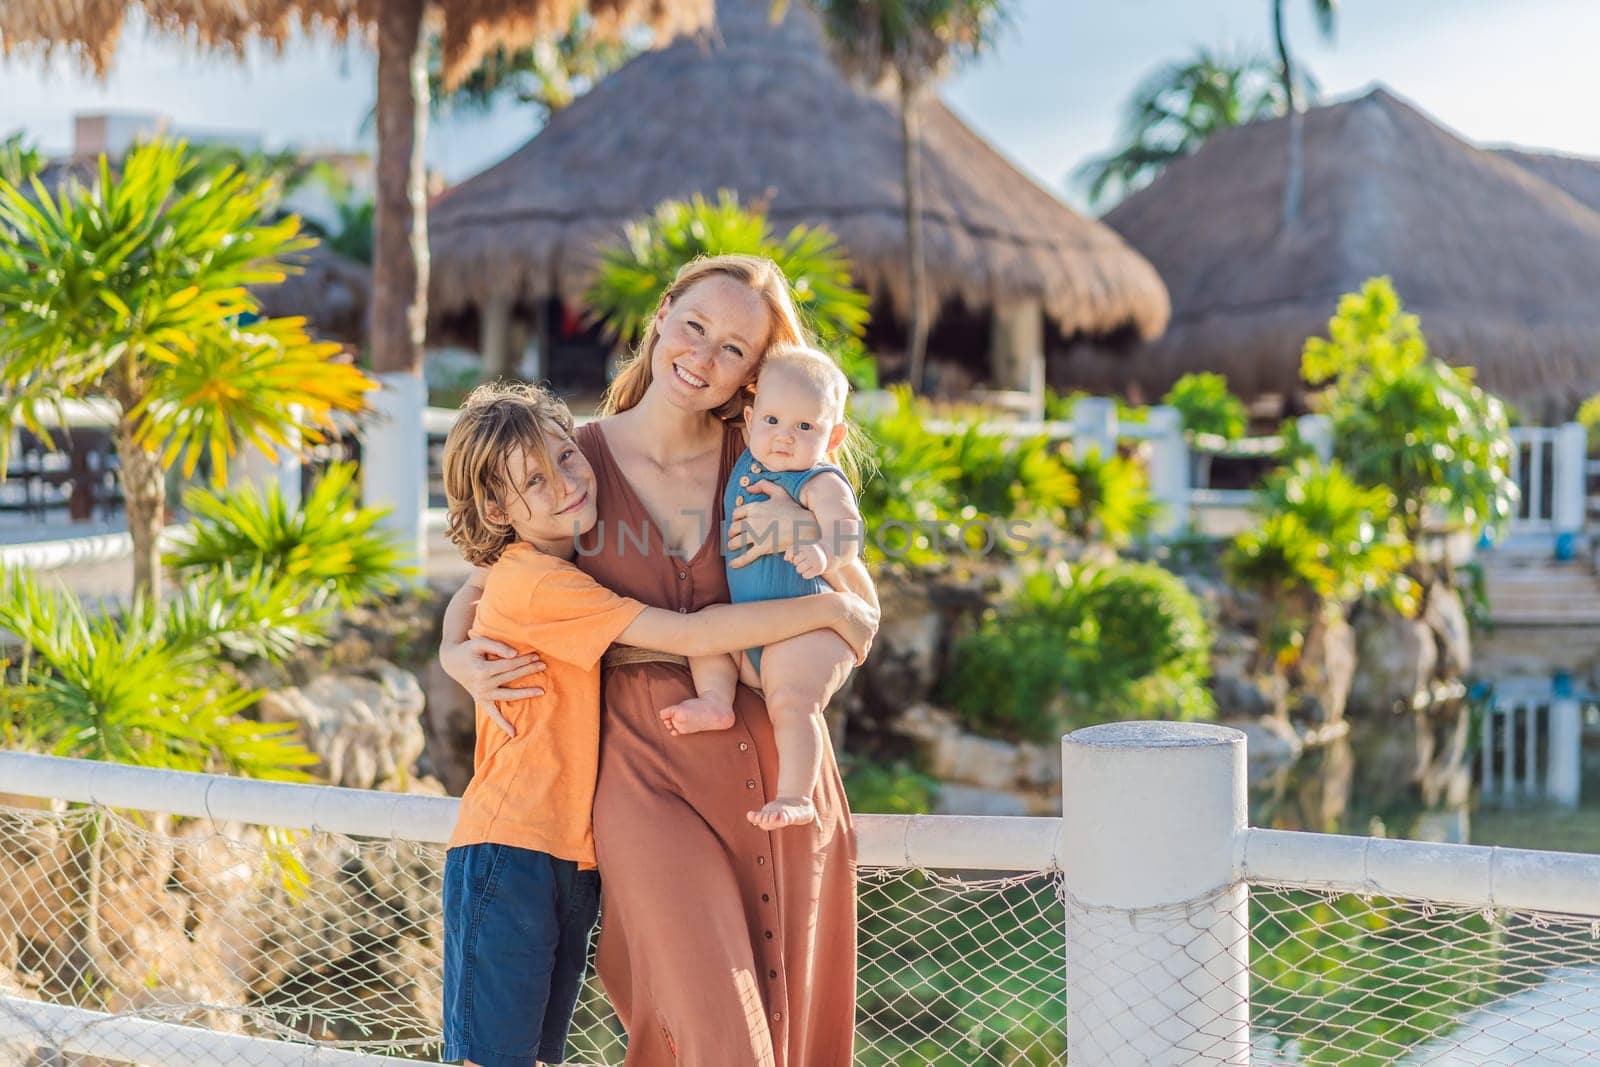 In a tropical paradise, a mom lovingly embraces her baby and 10-year-old son amid lush palm trees and thatched roofs, creating heartwarming family memories.